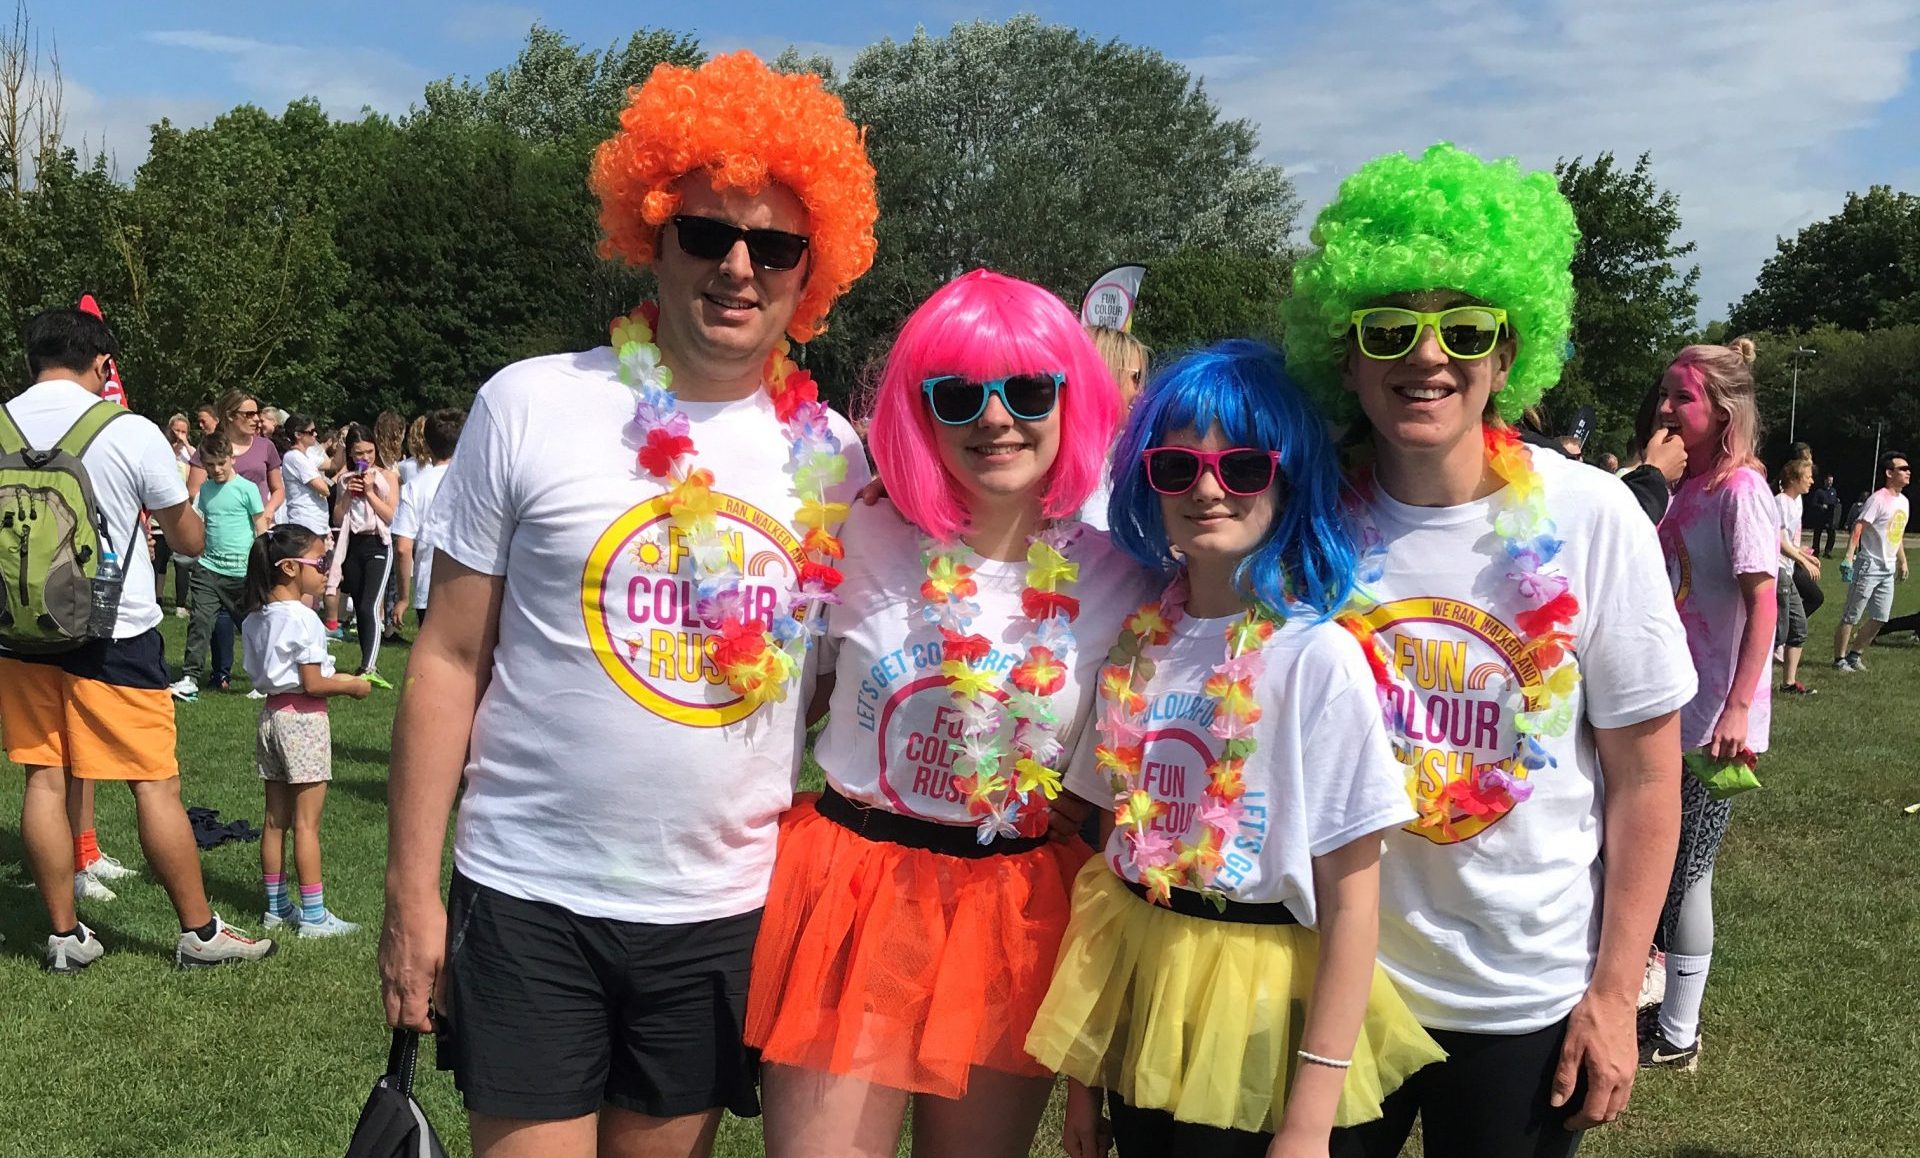 Group of people with colourful wigs and sunglasses on with fun colour rush tshirts on